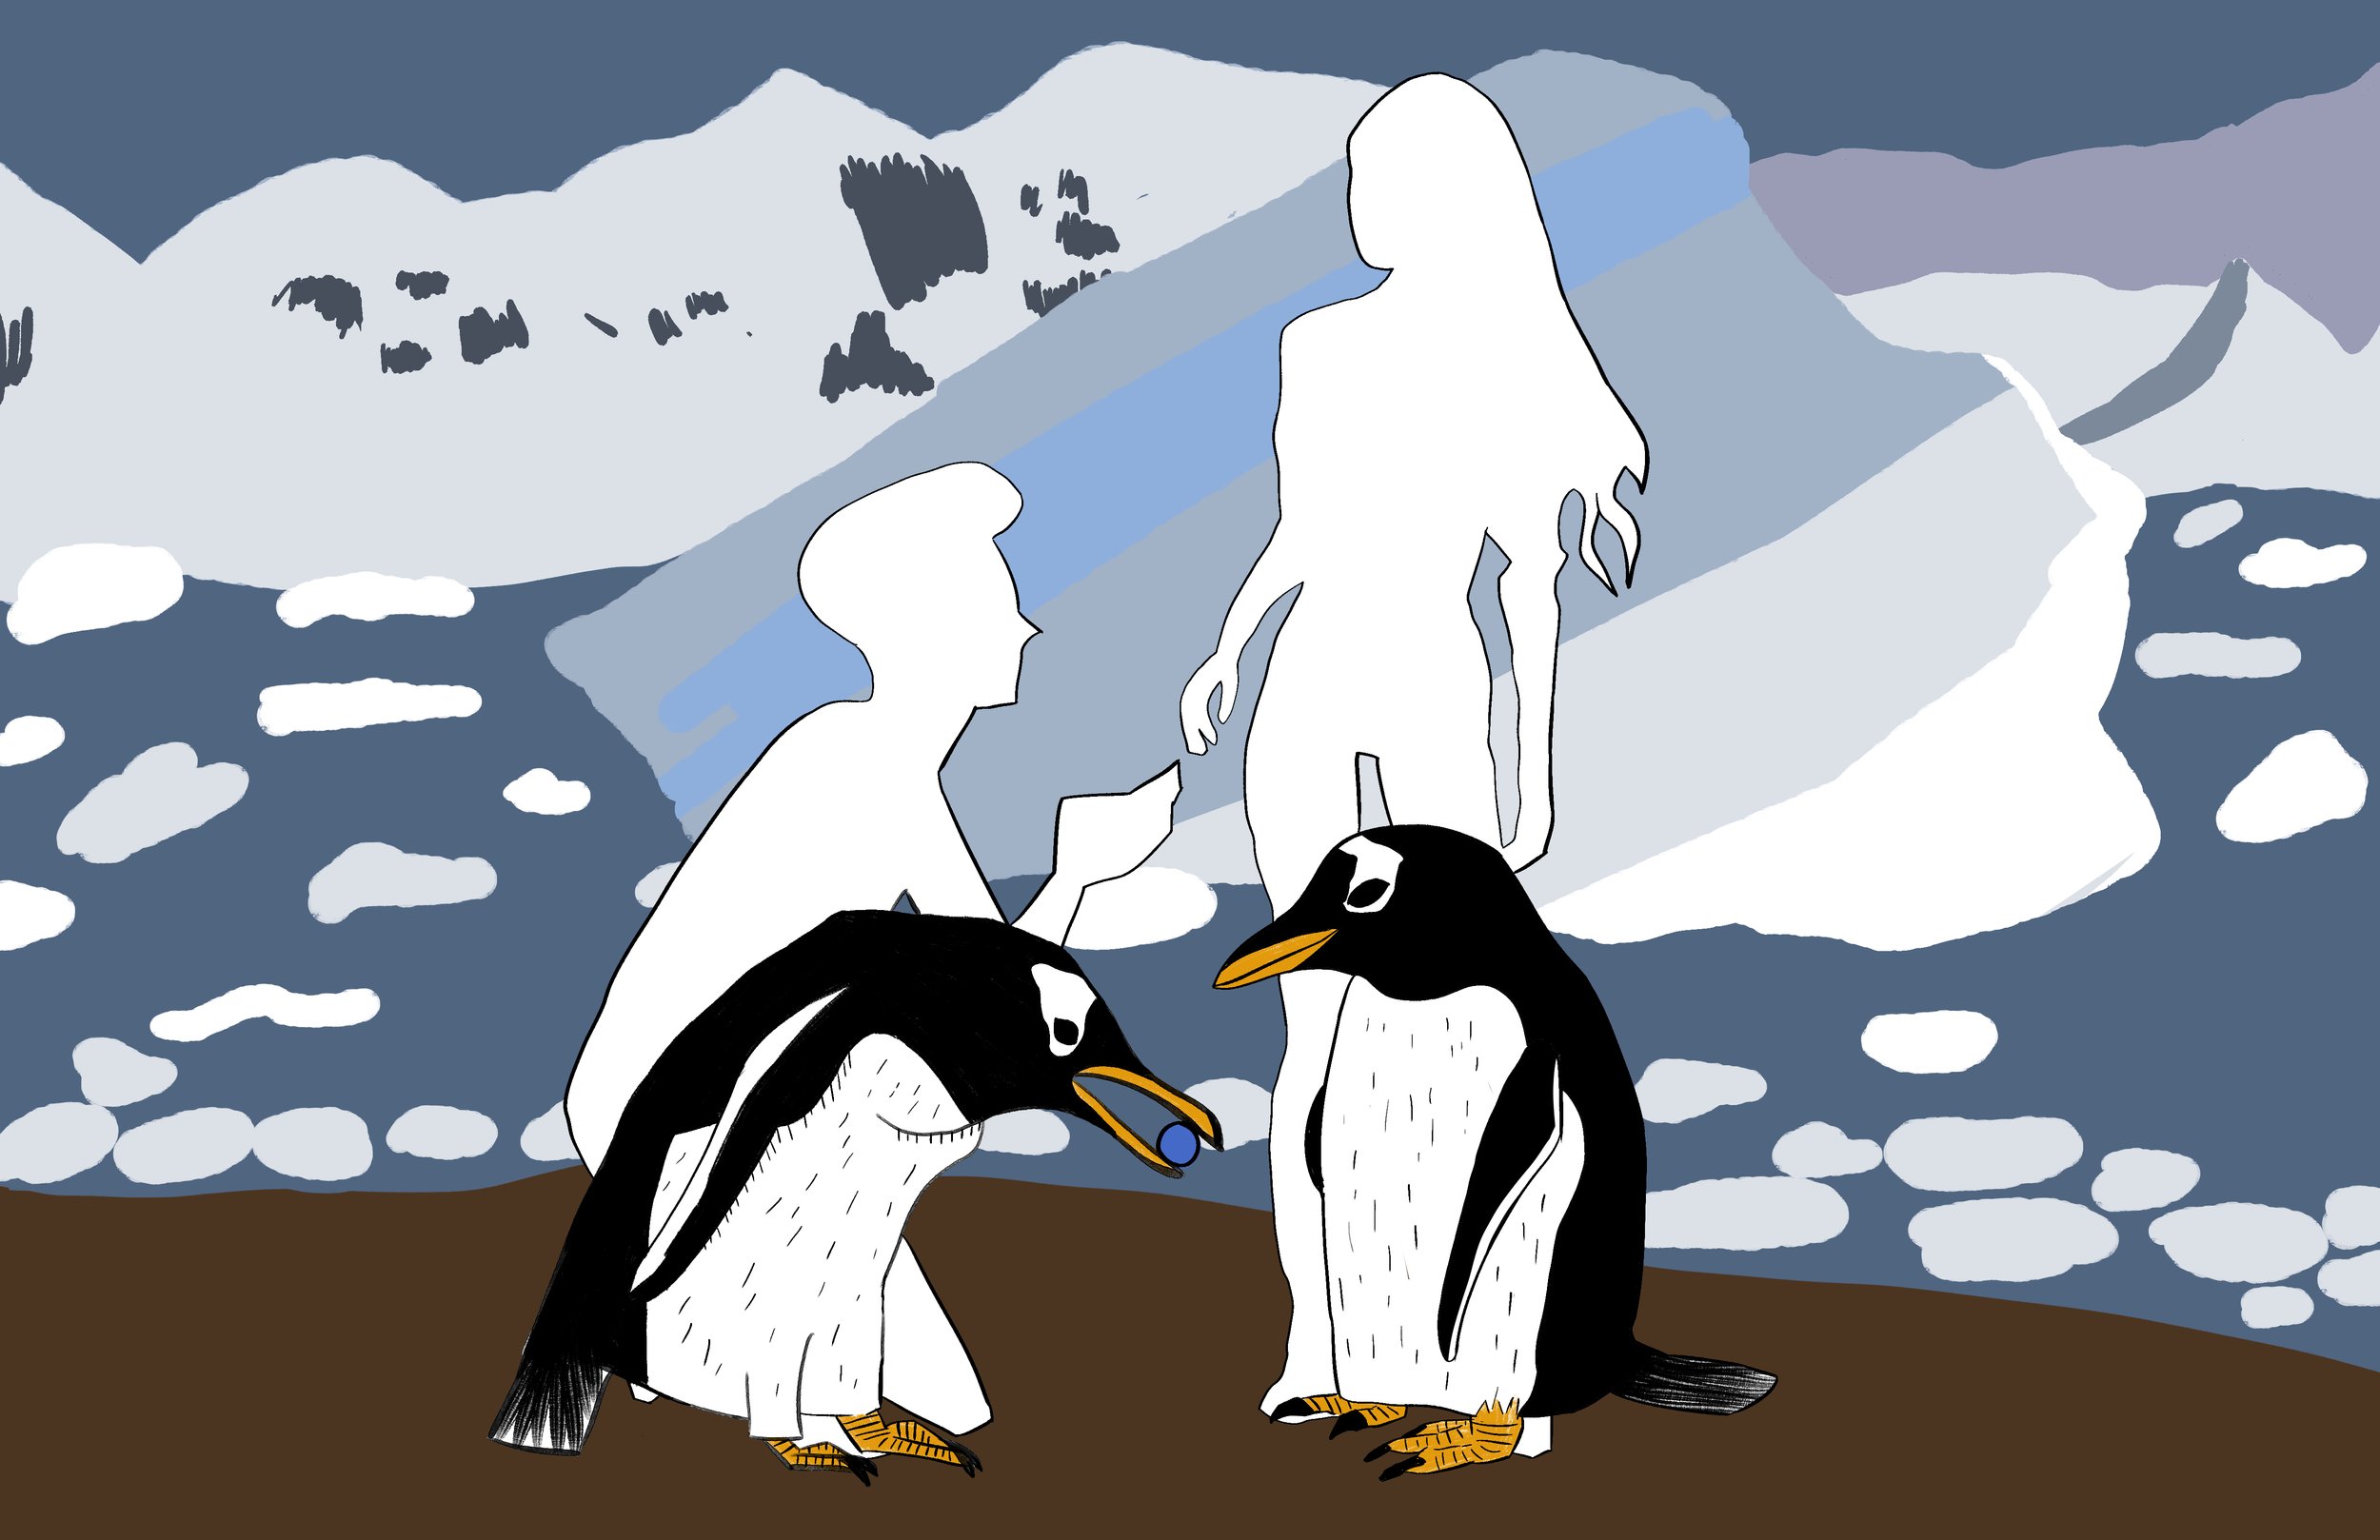 Marriage: Penguins and Humans Propose